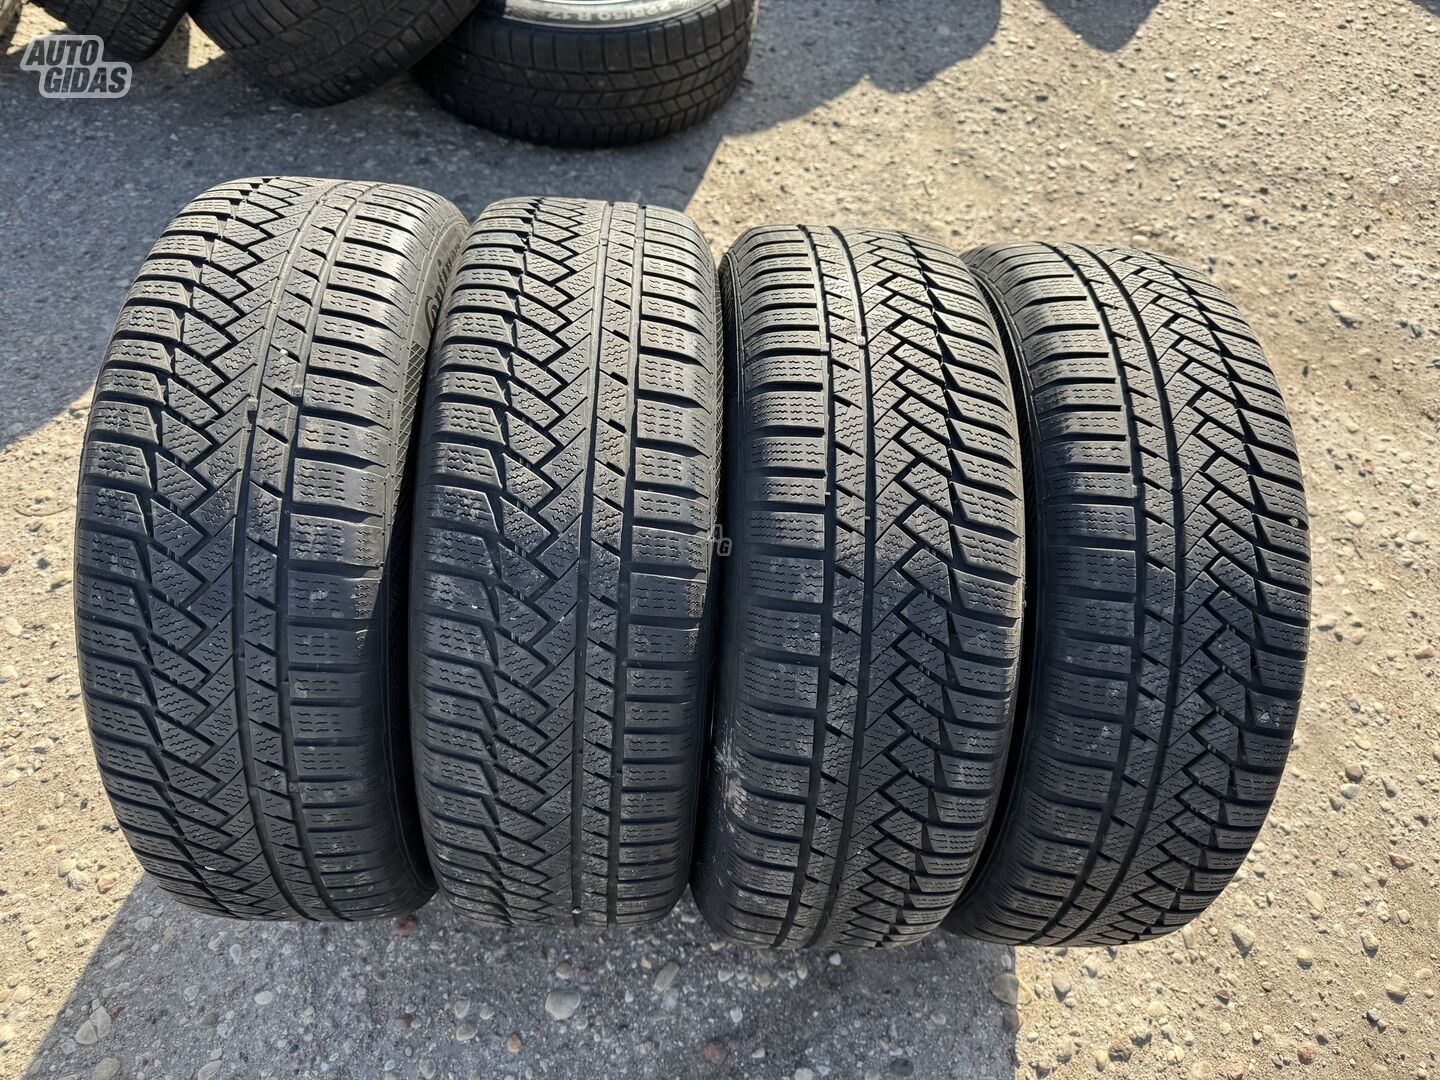 Continental Siunciam, 5-6mm 2018 R16 universal tyres passanger car